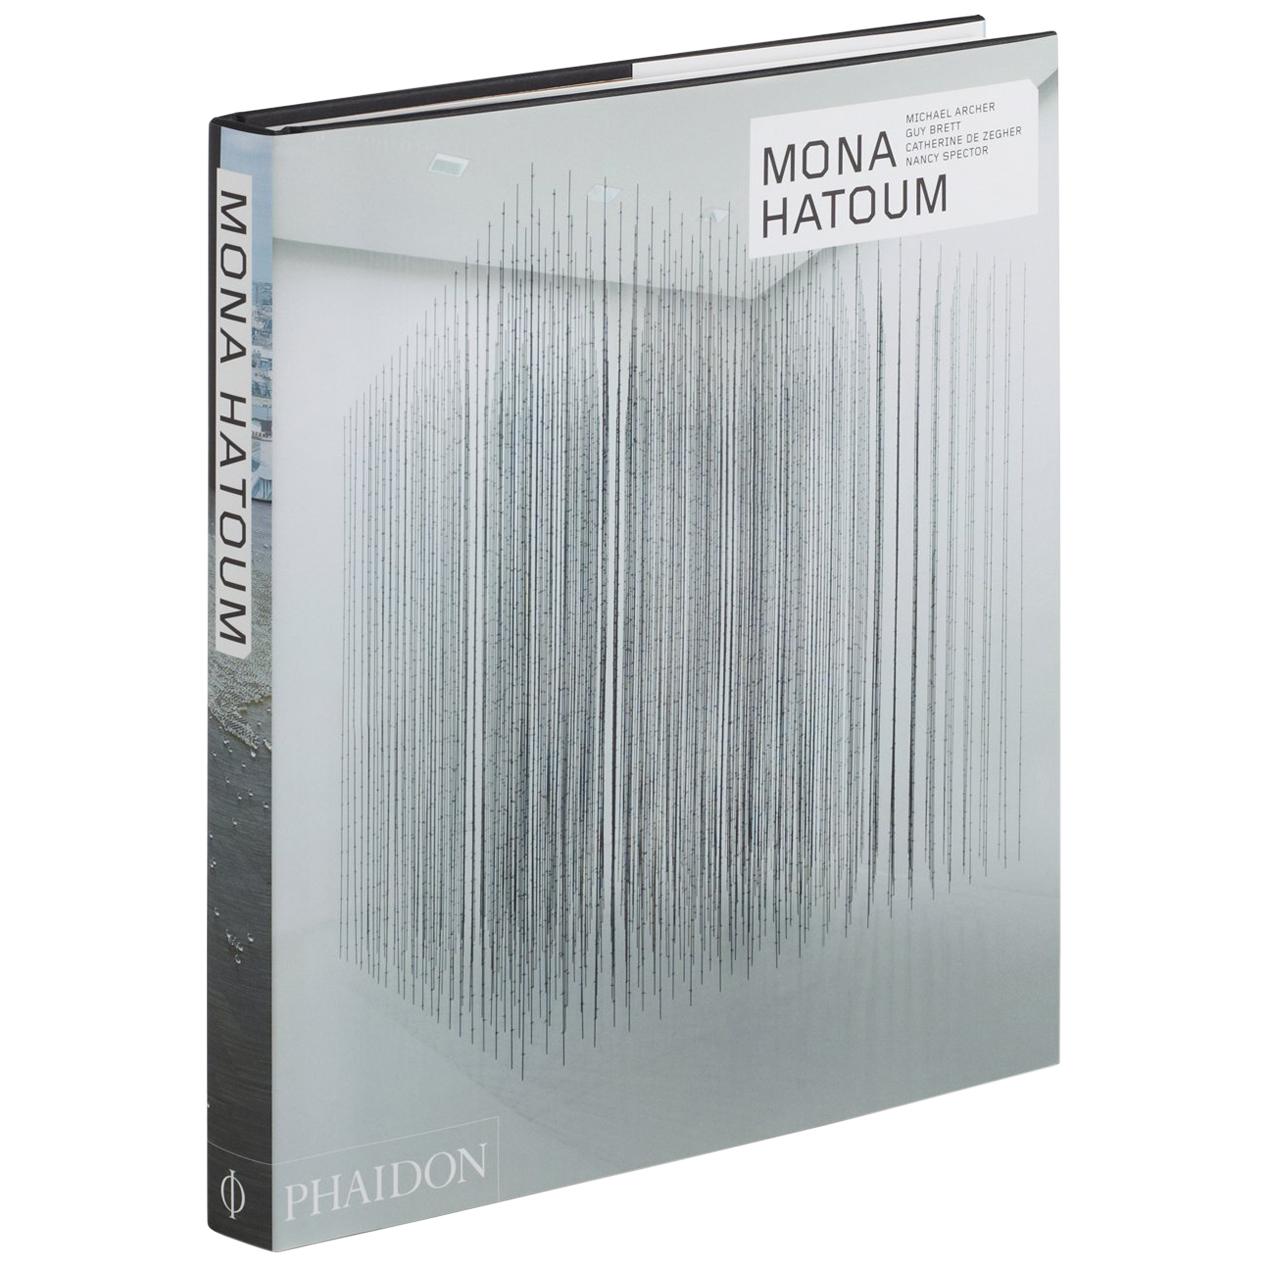 Mona Hatoum Revised and Expanded Edition (Phaidon Contemporary Artists Series) For Sale